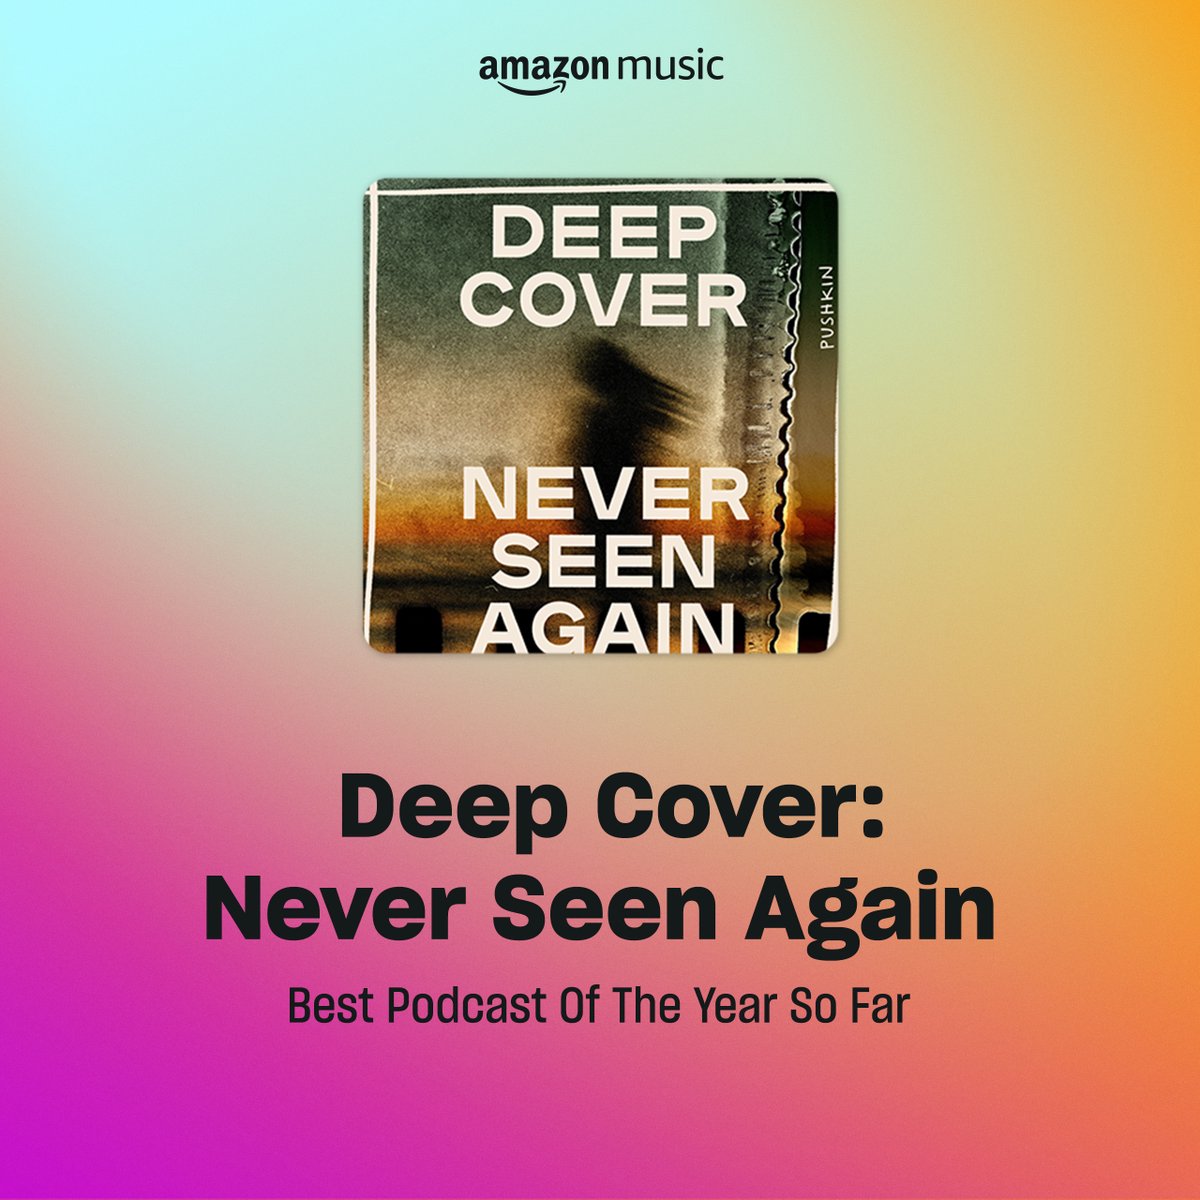 Soooo... @amazonmusic named @JakeHalpern's 'Deep Cover - Never Seen Again' one of this year’s best podcasts so far! It’s high time for a re-listen, don’t ya think?🙌 Click the link to hear the full season NOW: bit.ly/44xudLF